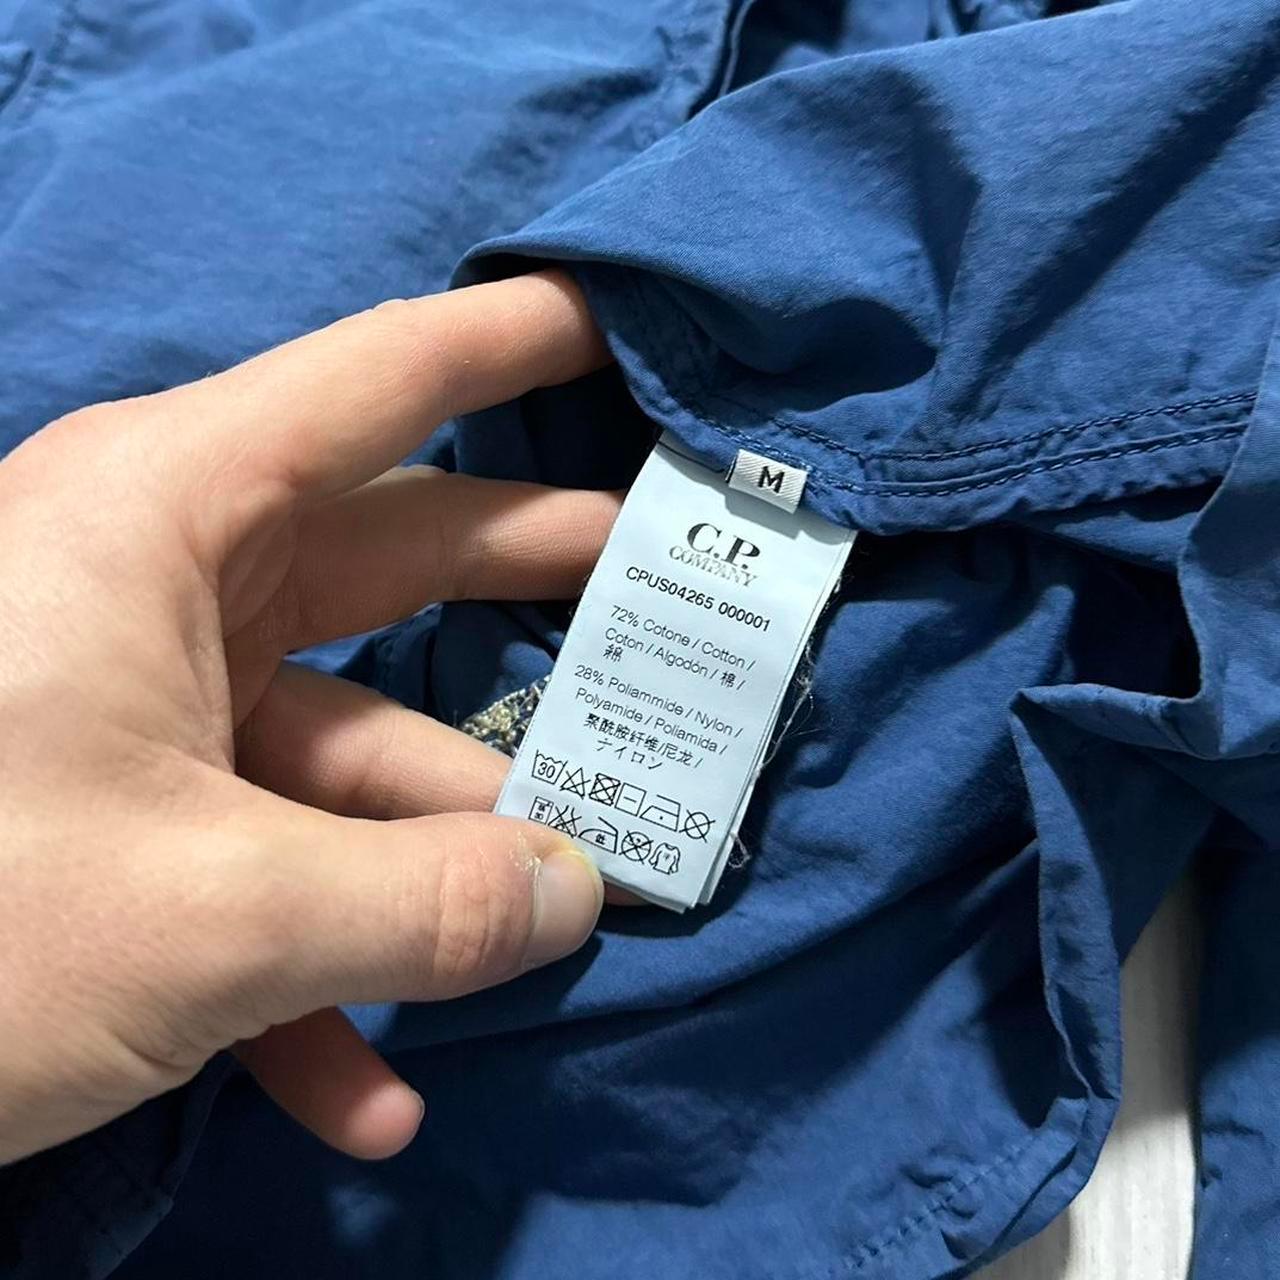 CP Company Blue Canvas Jacket - Known Source